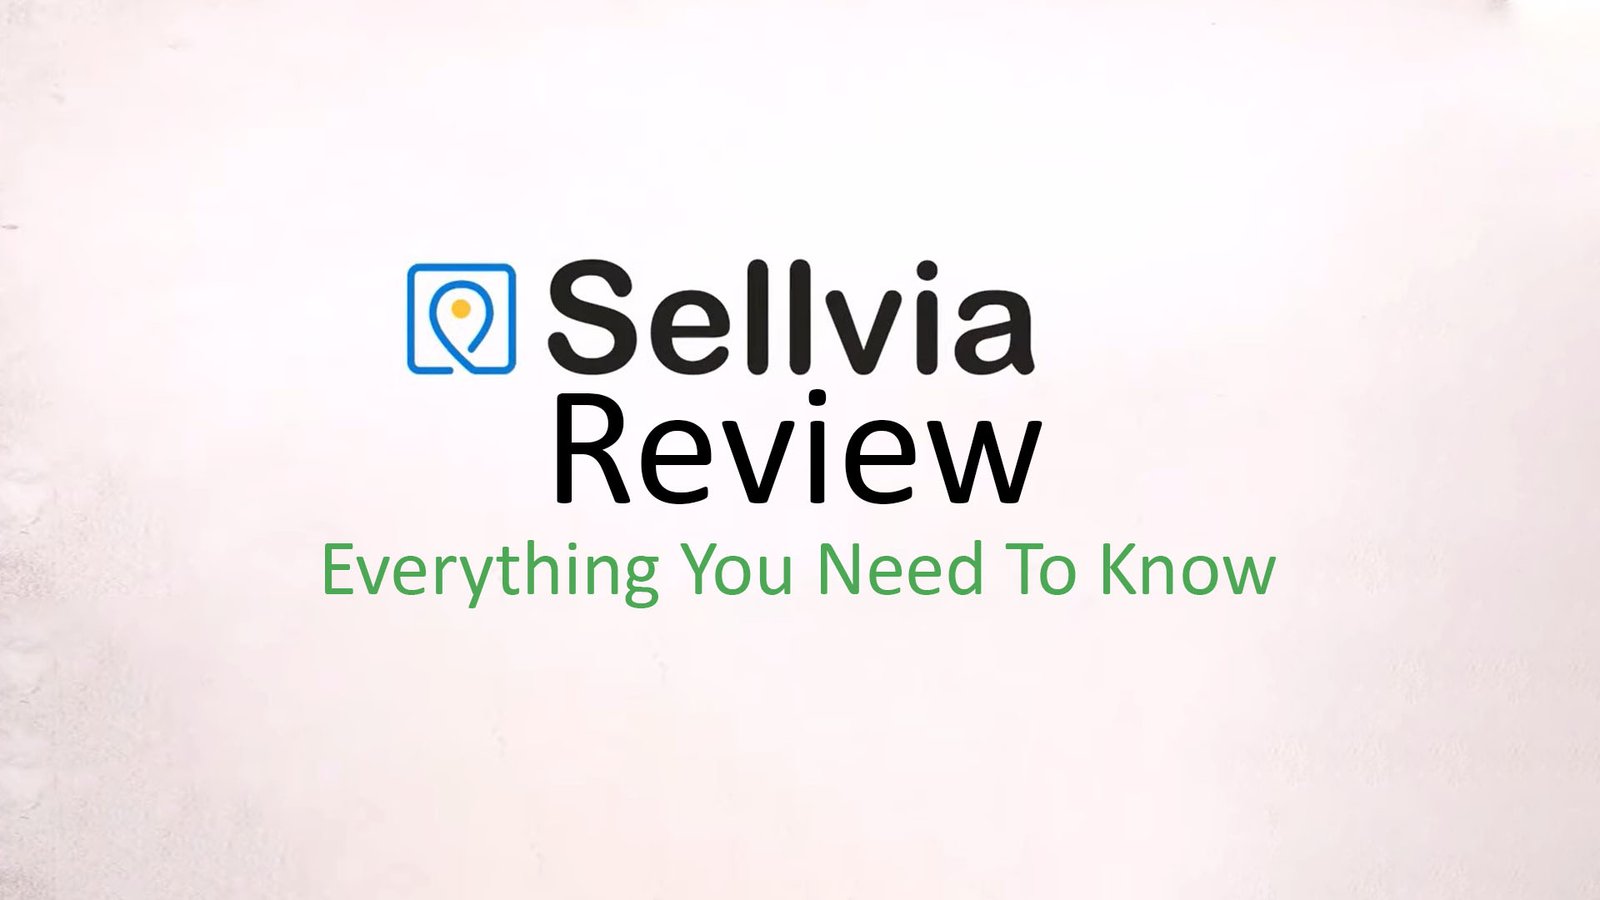 Sellvia Review